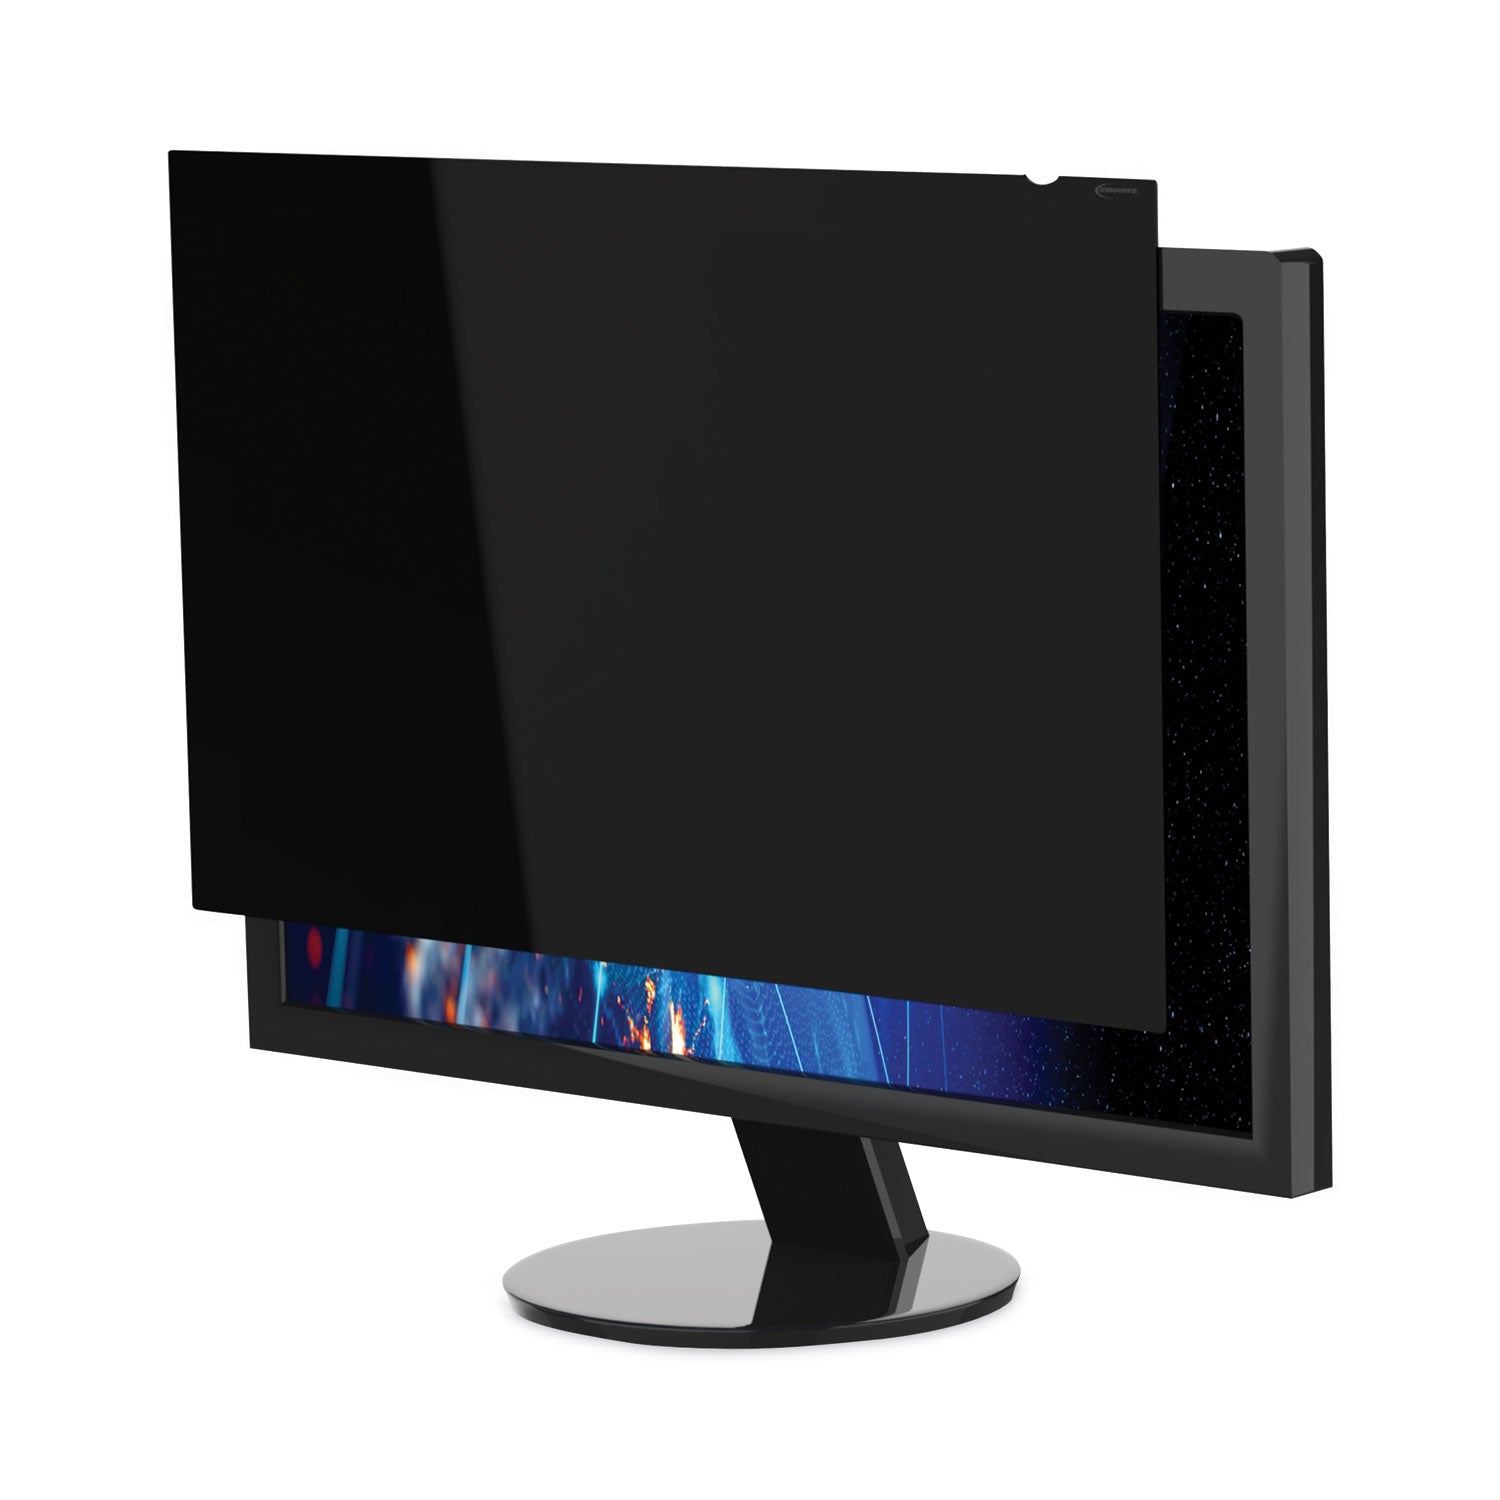 blackout-privacy-filter-for-30-widescreen-flat-panel-monitor-1610-aspect-ratio_ivrblf30w - 3